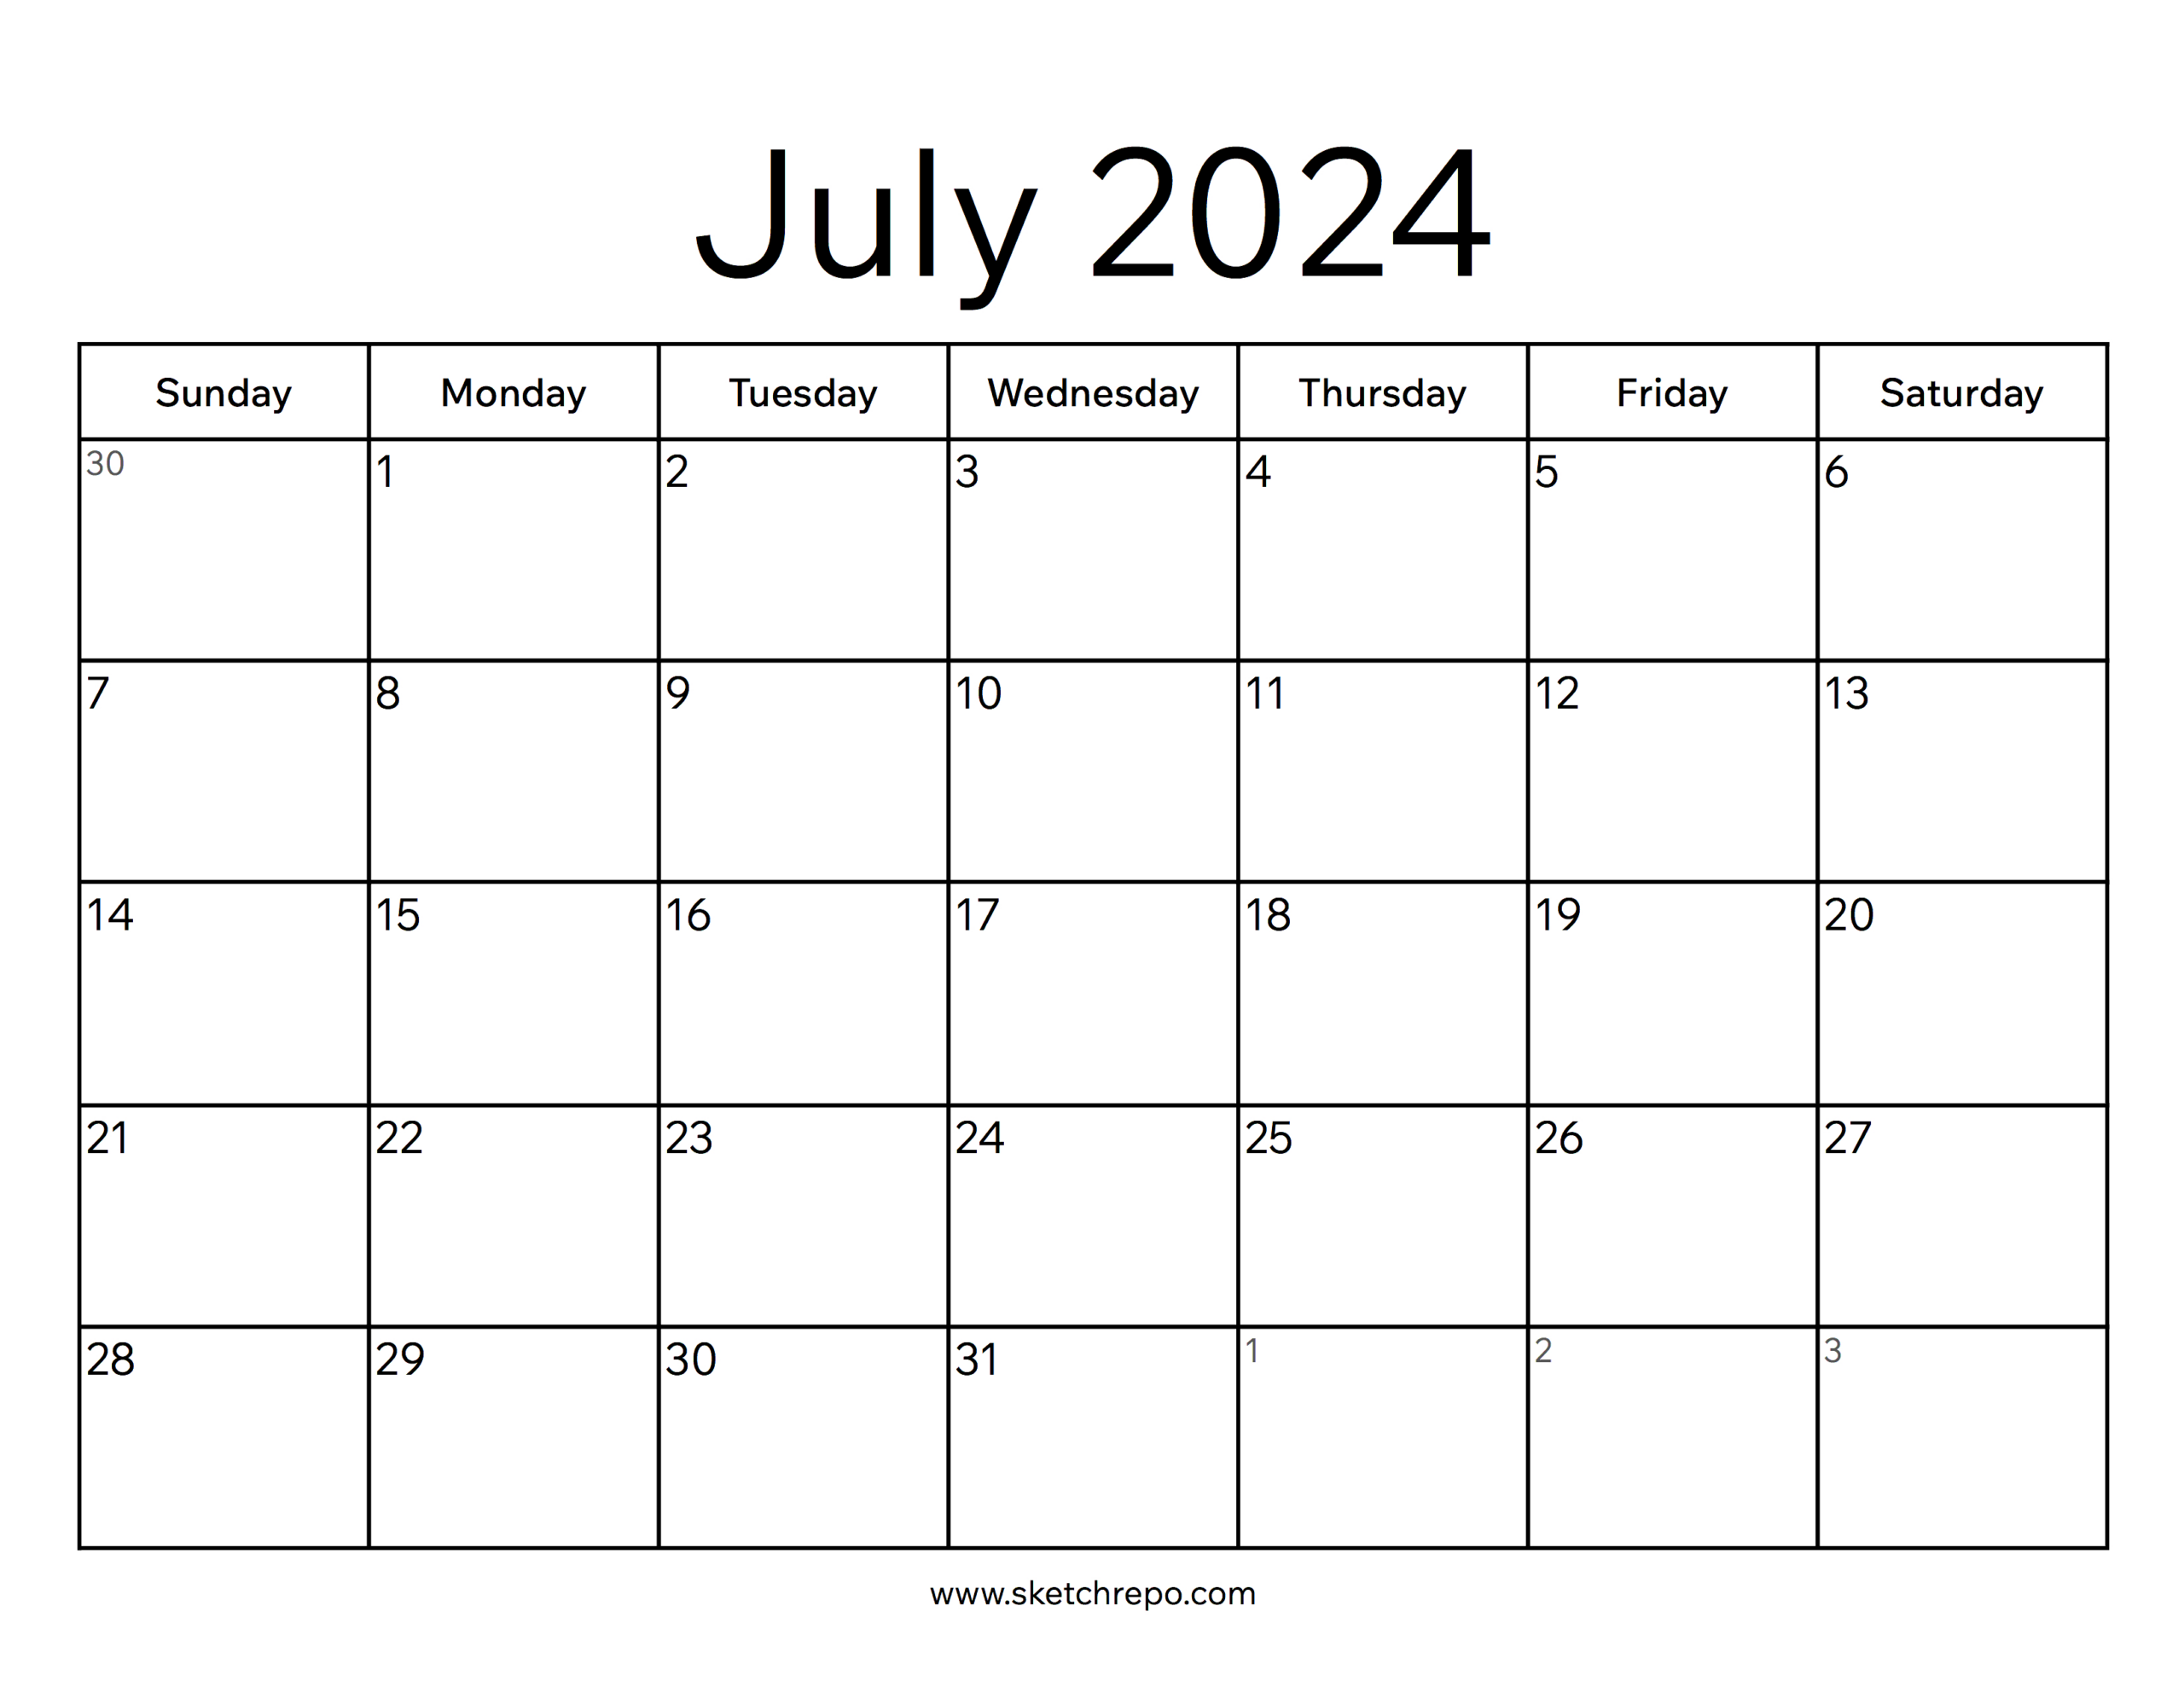 July 2024 Calendar – Sketch Repo | Give Me The Calendar For July 2024